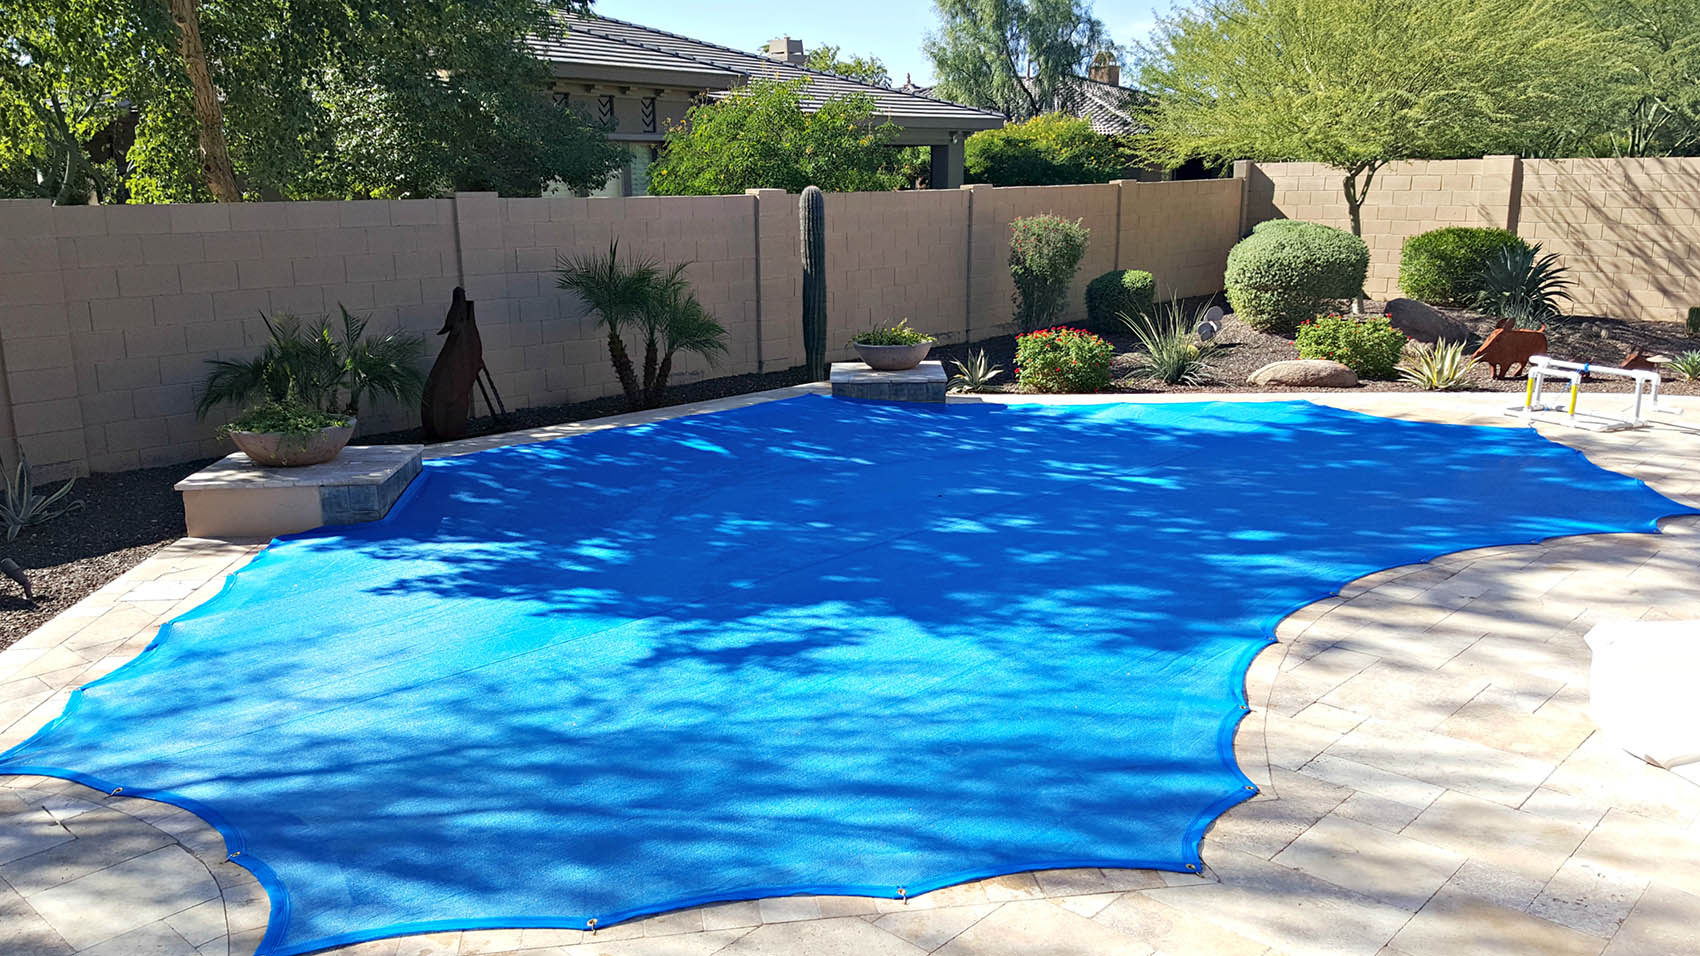 Pool Cover Fittings, Pool Safety Products & Installation